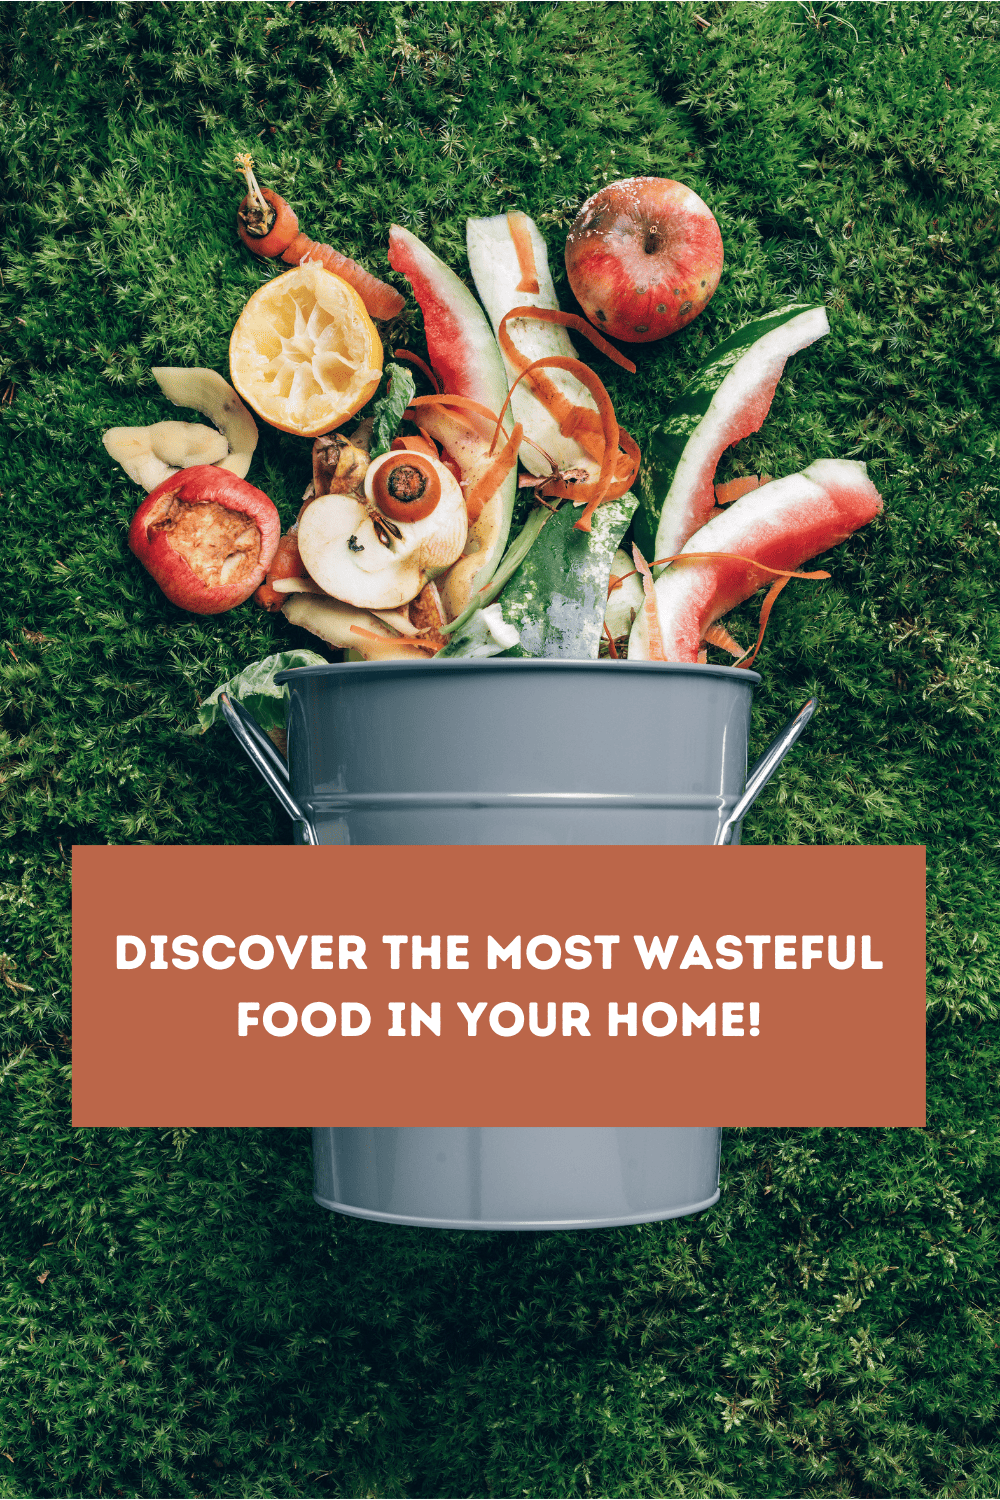 Don't waste money on food! Learn how to identify the most wasted food in your household, the reasons why it's being wasted, and how to prevent it. Start saving money today with these simple tips and tricks! #FoodWaste #SavingMoney via @mystayathome